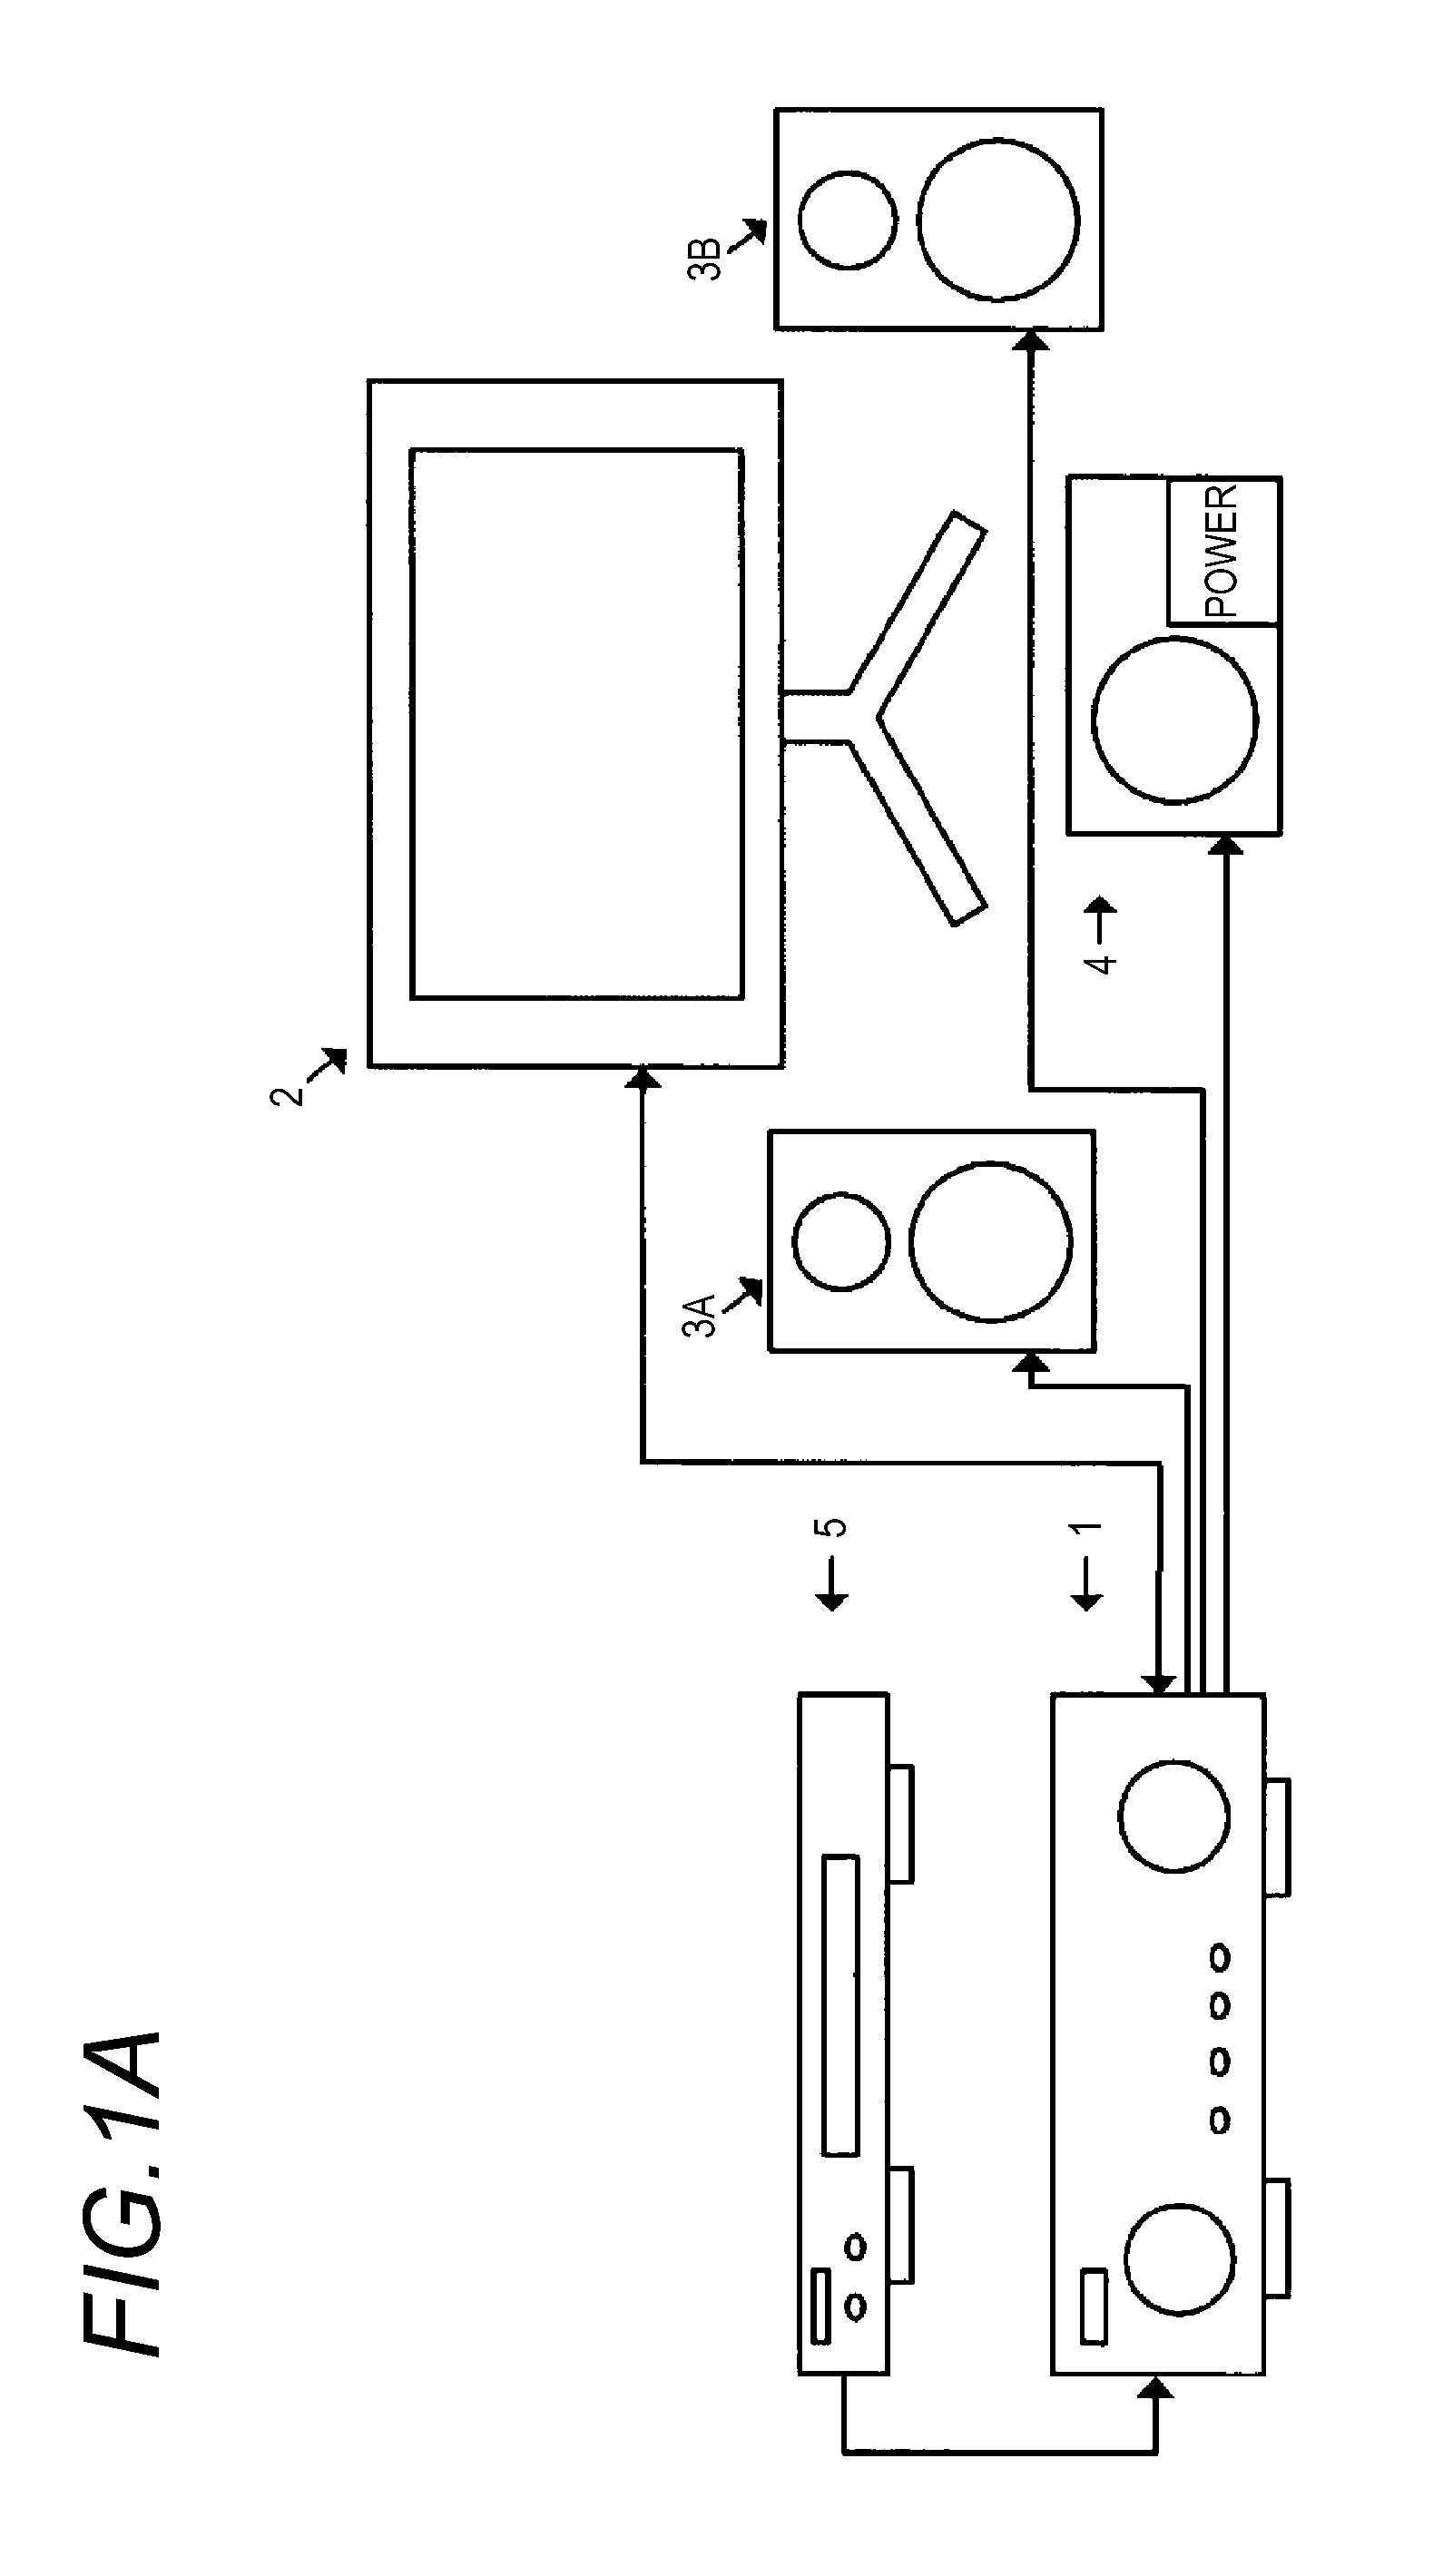 Acoustic Processing Device